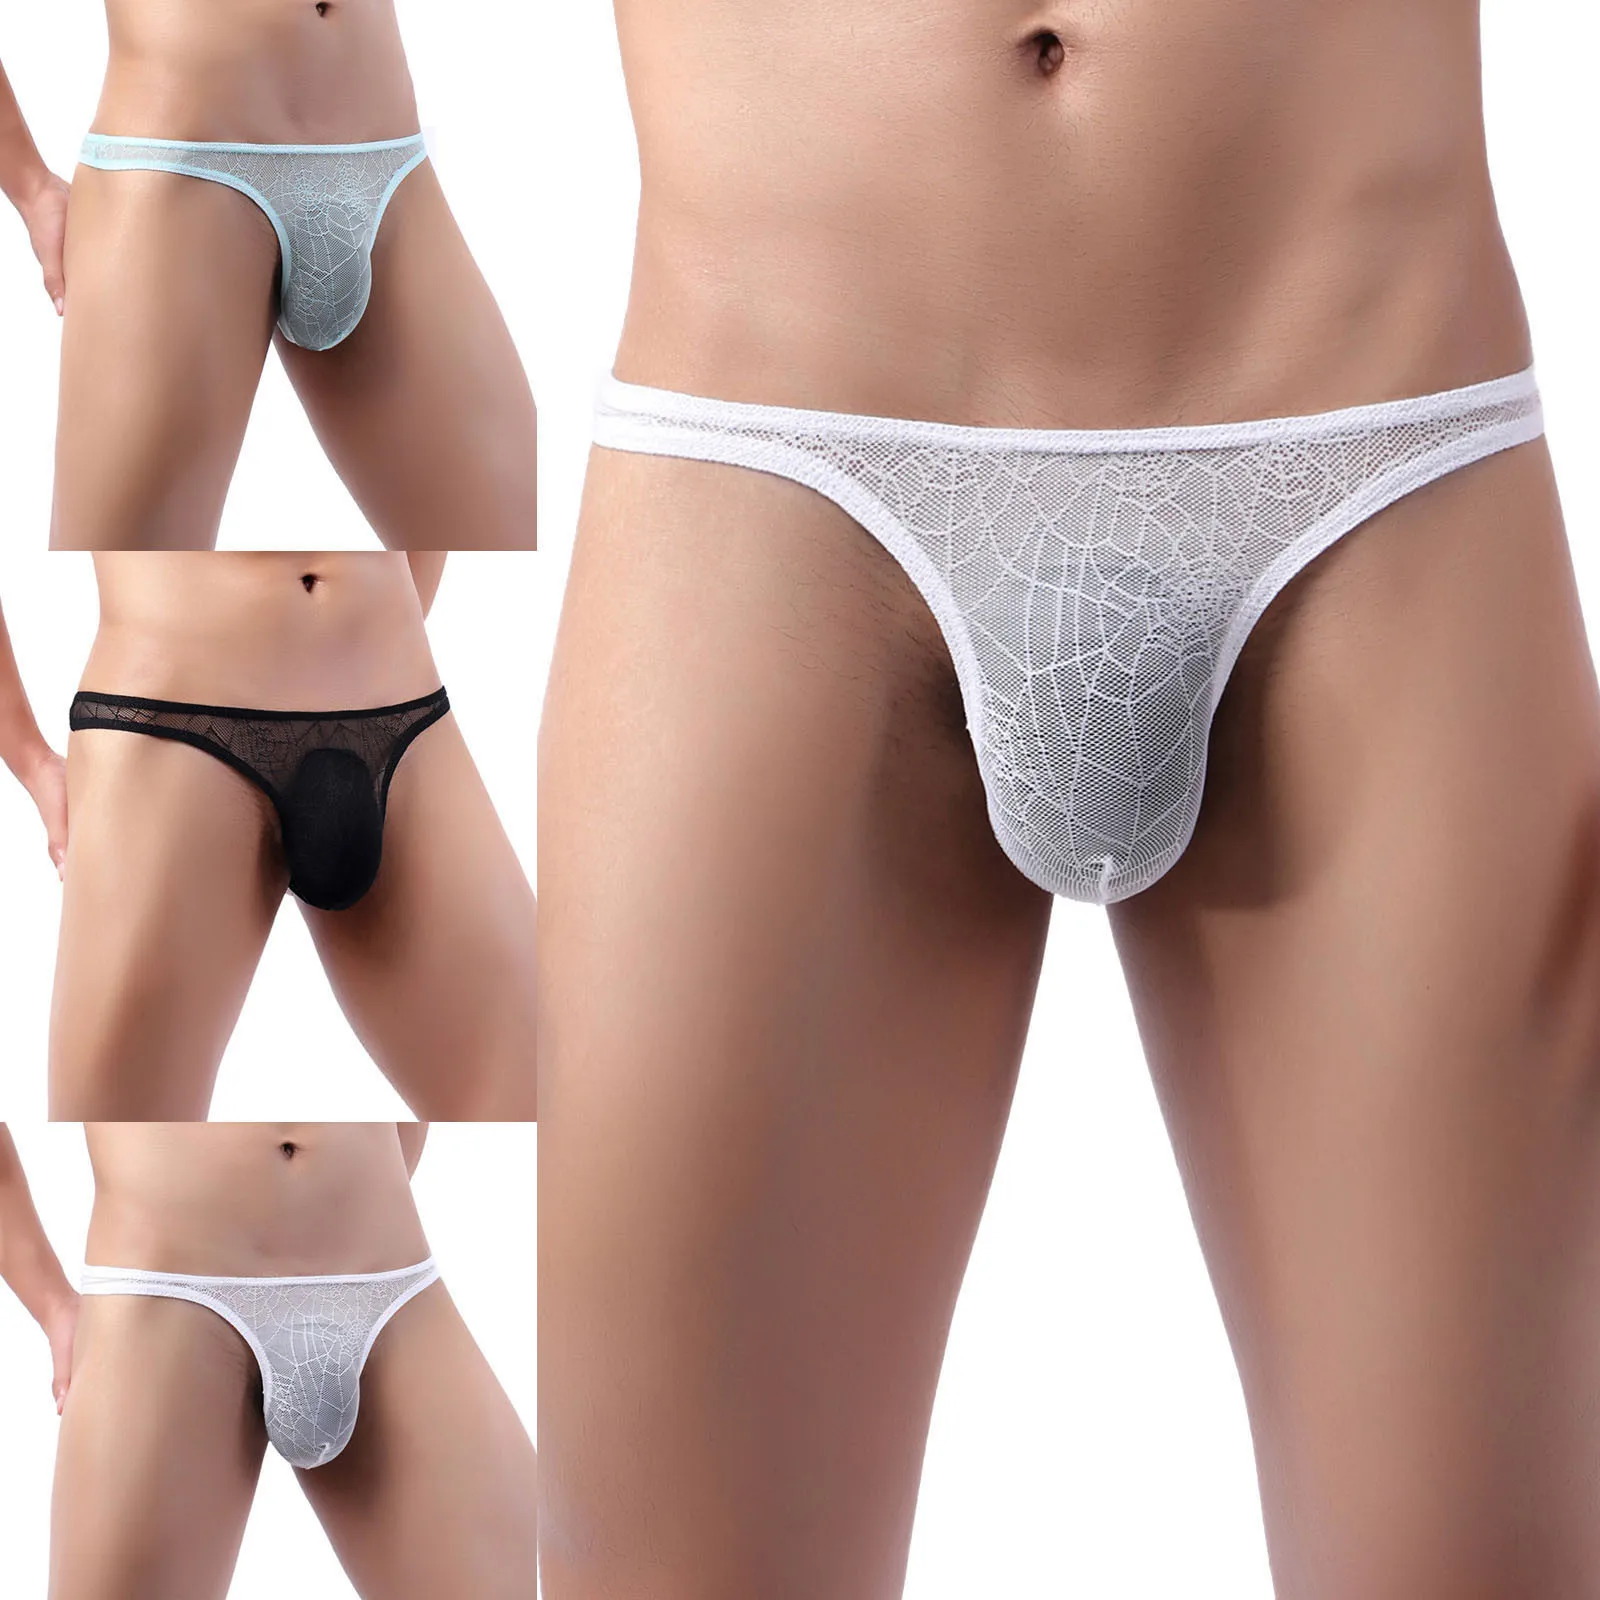 

New Men's underwear sexy spider web low-rise thong panties men's sexy see-through thong panties lace panties Ѭђс мђжские X*